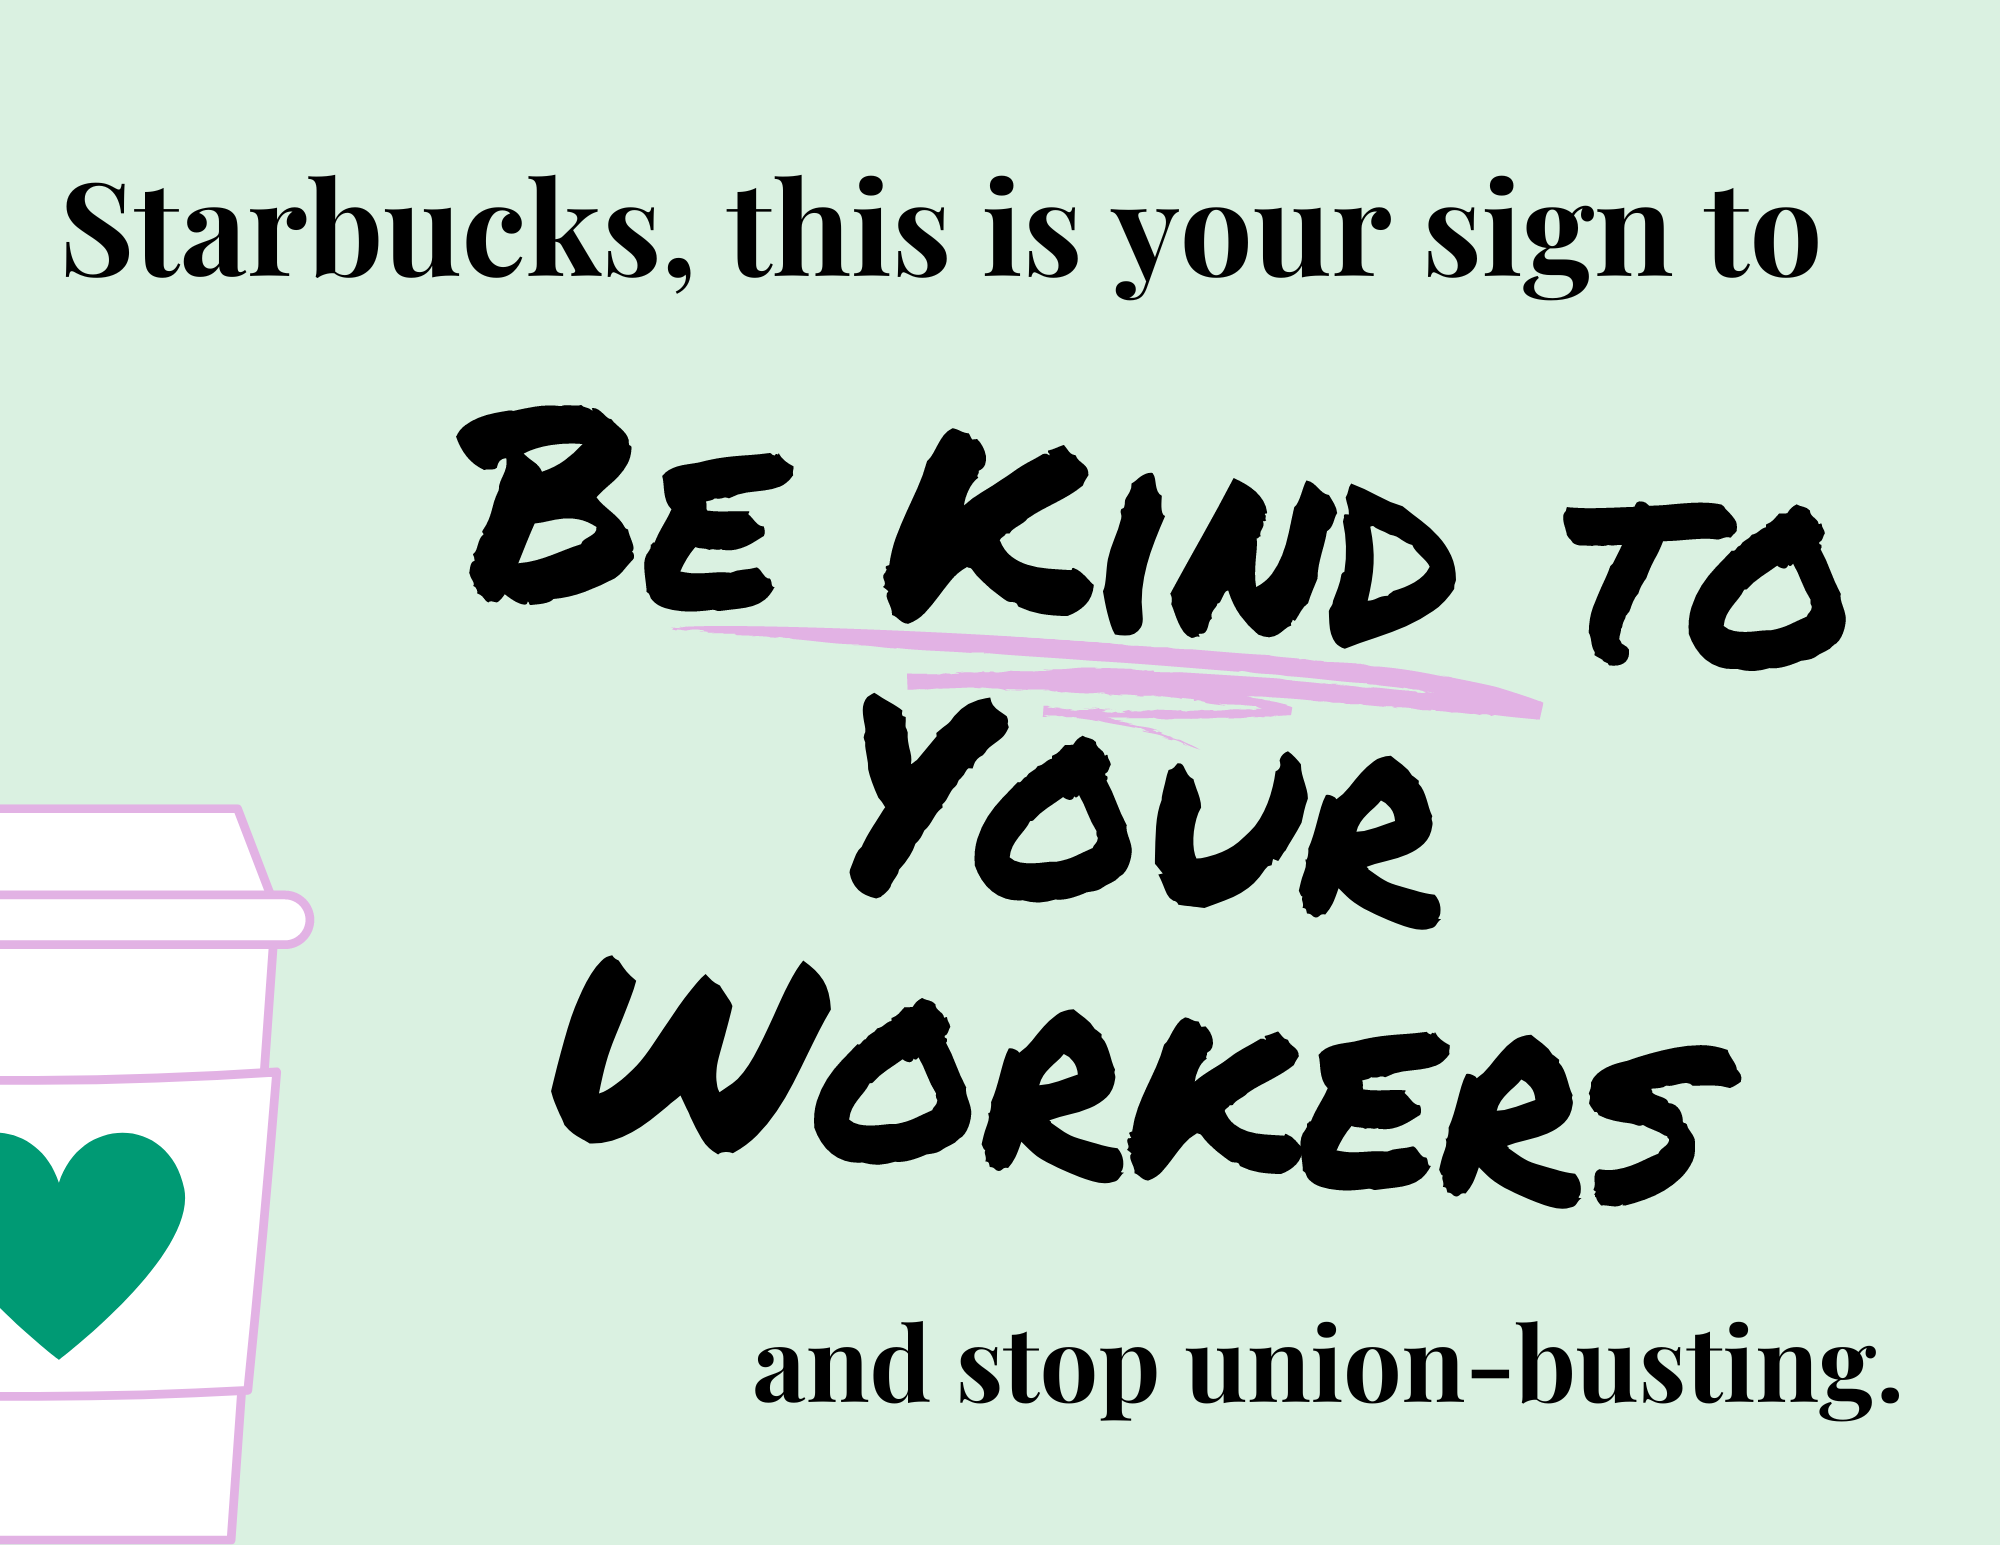 Starbucks this is your sign to be kind to your workers and stop union busting